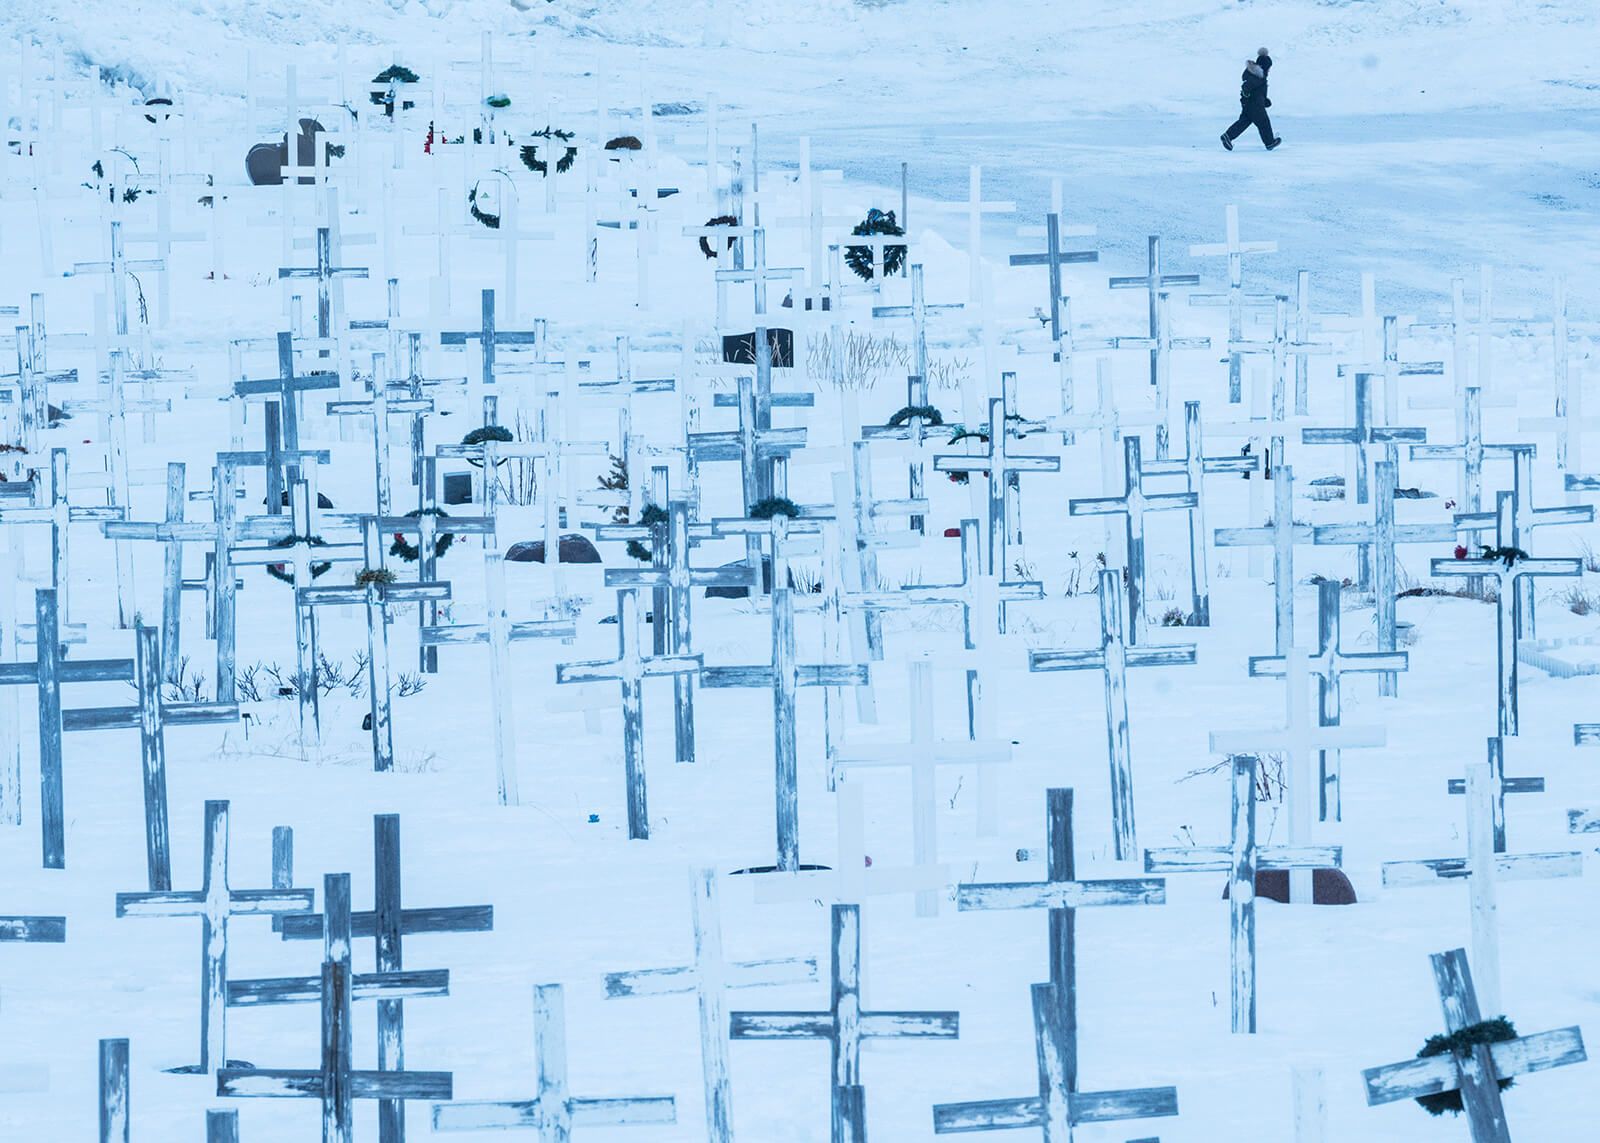 Crossees in a cemetery in Nuuk. Greenland has one fo the highest rates of suicide in the world, which researchers attribute in part to the fact that many people have difficulty finding their place at the crossroads of traditional and modern lifestyles. Image by Jonas Bendiksen/Magnum Photos. Greenland, 2018.